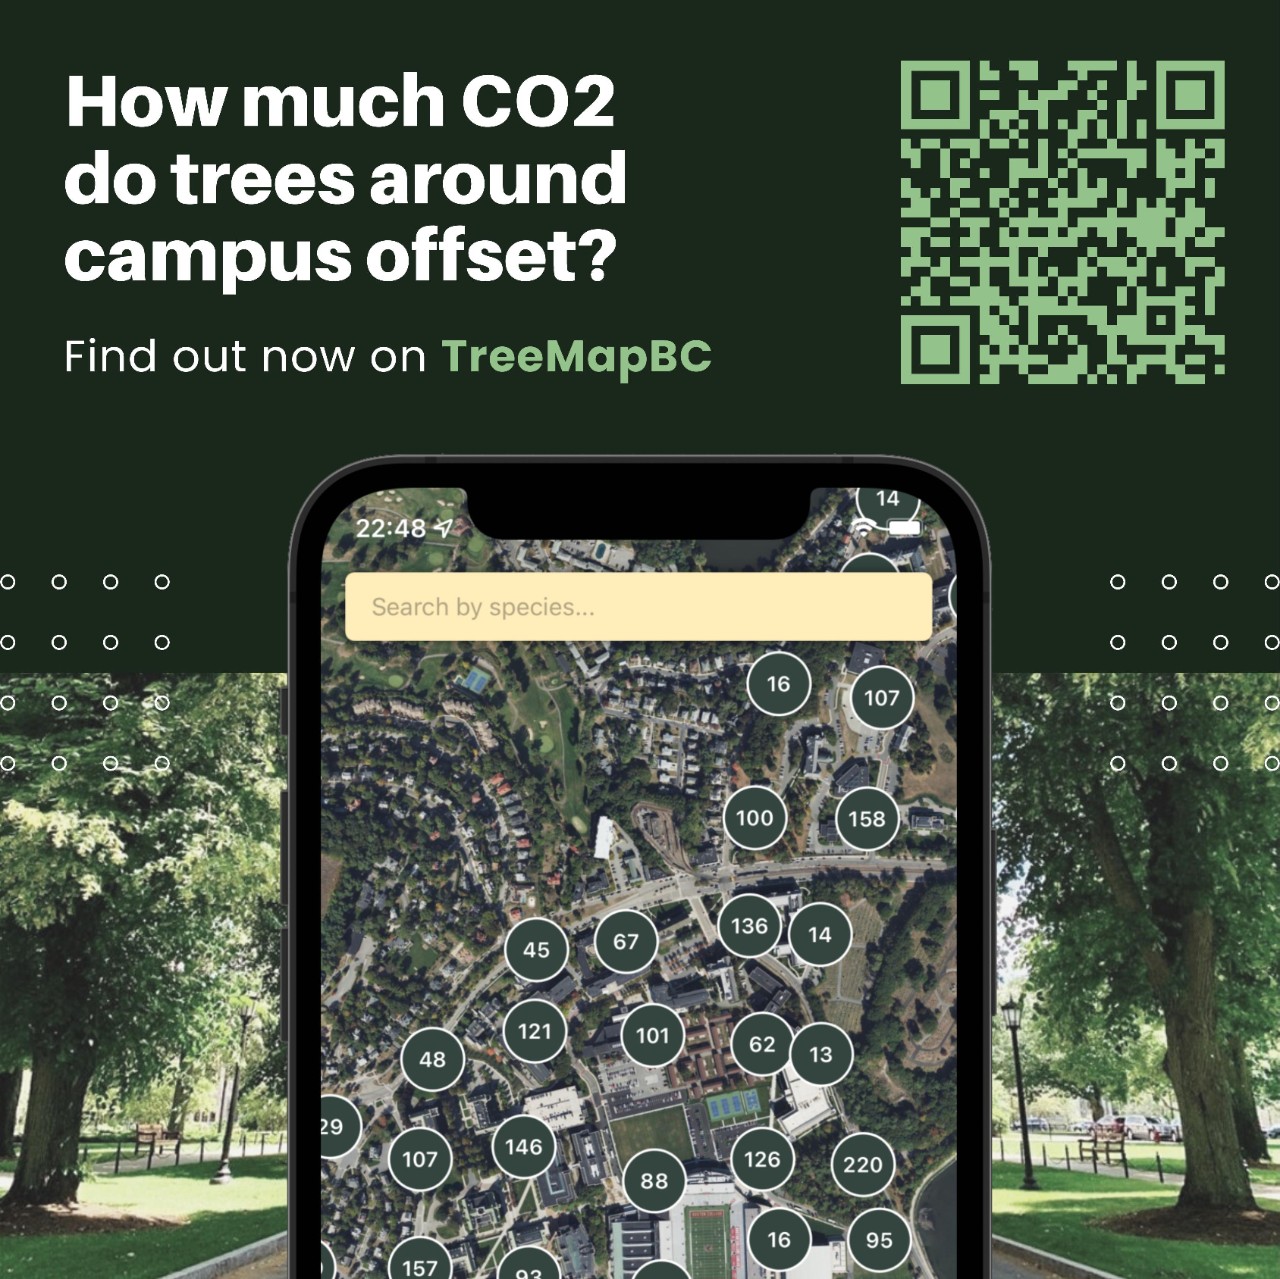 Image with a phone showing the TreeMapBC application and wording "How much CO2 do trees around campus offset?" "Find out now on TreeMapBC"